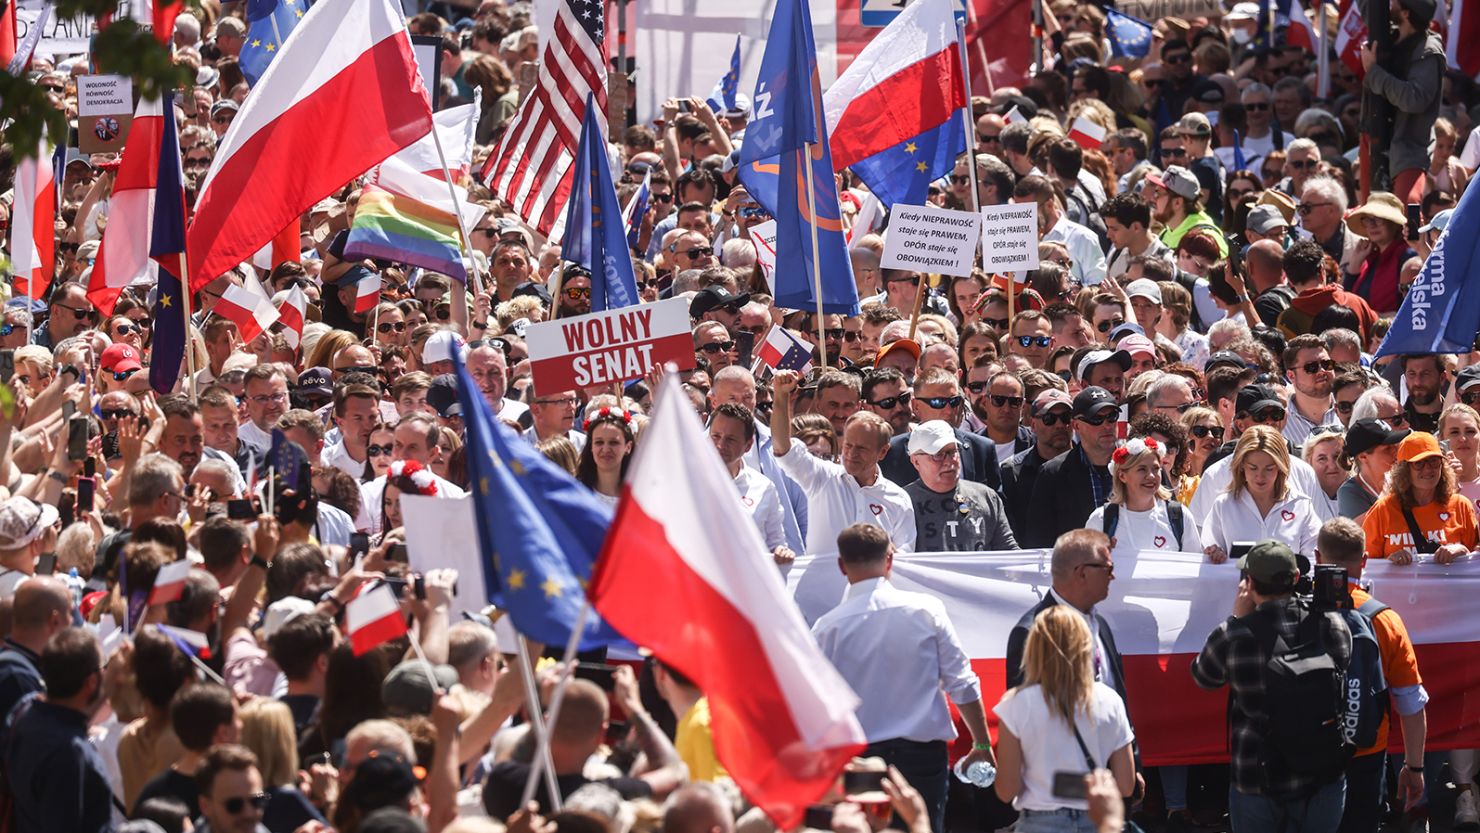 Opposition leader Donald Tusk and Lech Walesa, the former President of Poland and the former leader of the Solidarity movement, attend an anti-government march in Warsaw on June 4, 2023.